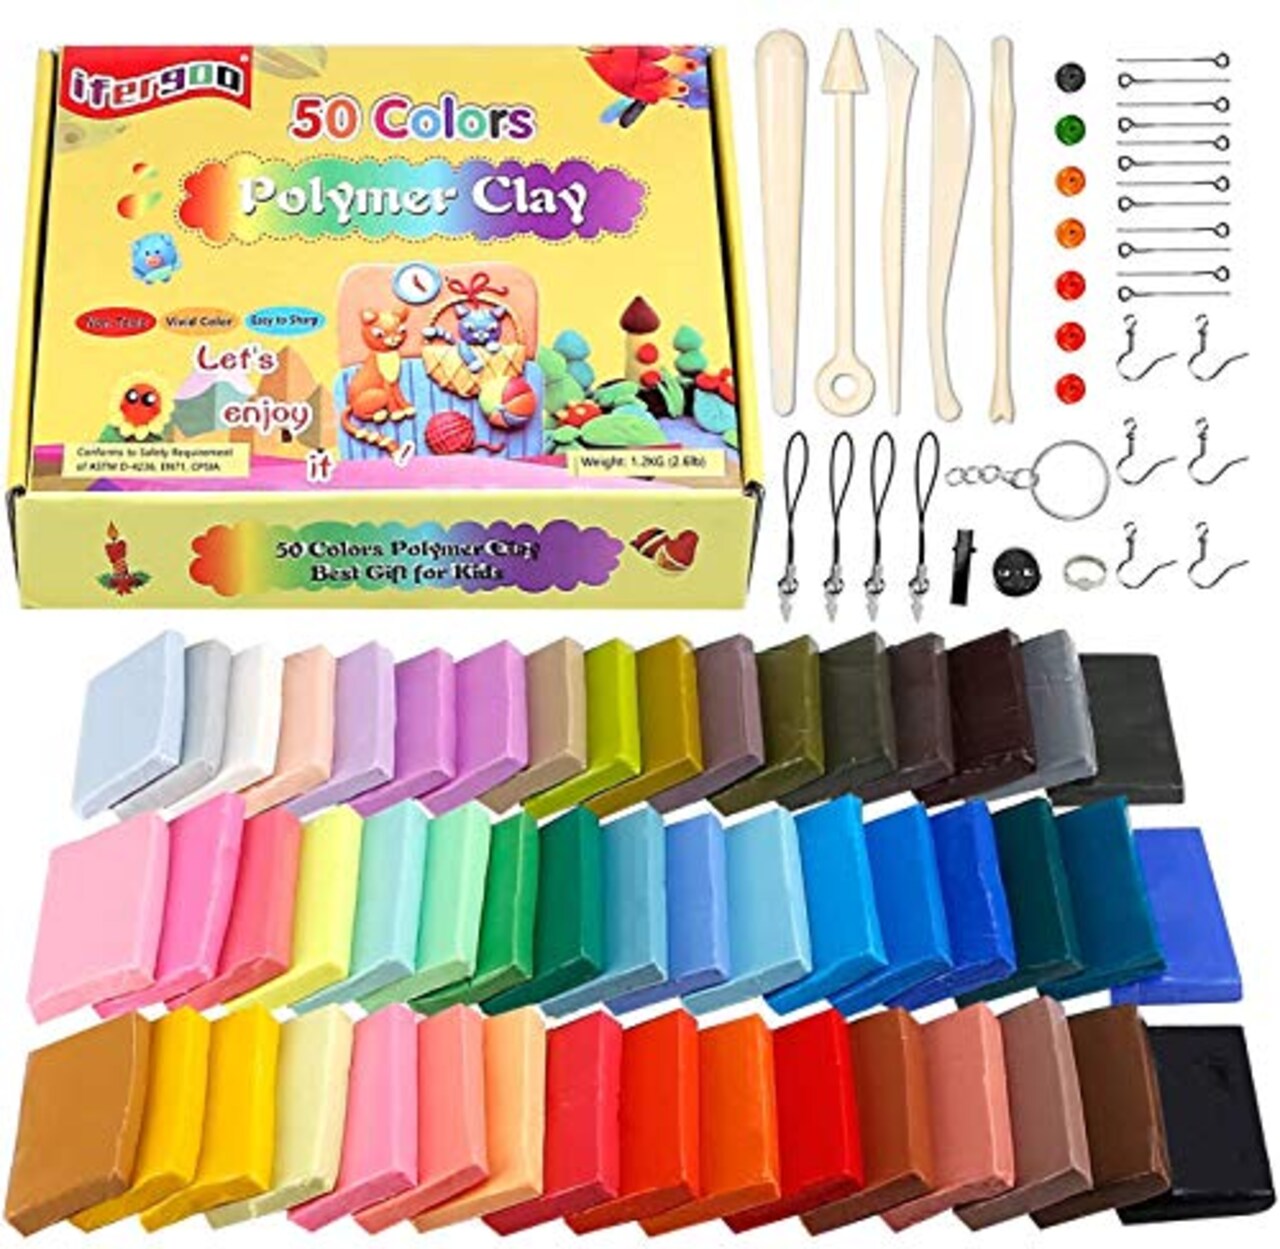 ifergoo Polymer Clay, Modeling Clay for Kids DIY Starter Kits, 50 Color  Oven Baked Model Clay, Non-Toxic, Non-Sticky, with Sculpting Tools, Ideal  Gift for Boys, Girls and Artists